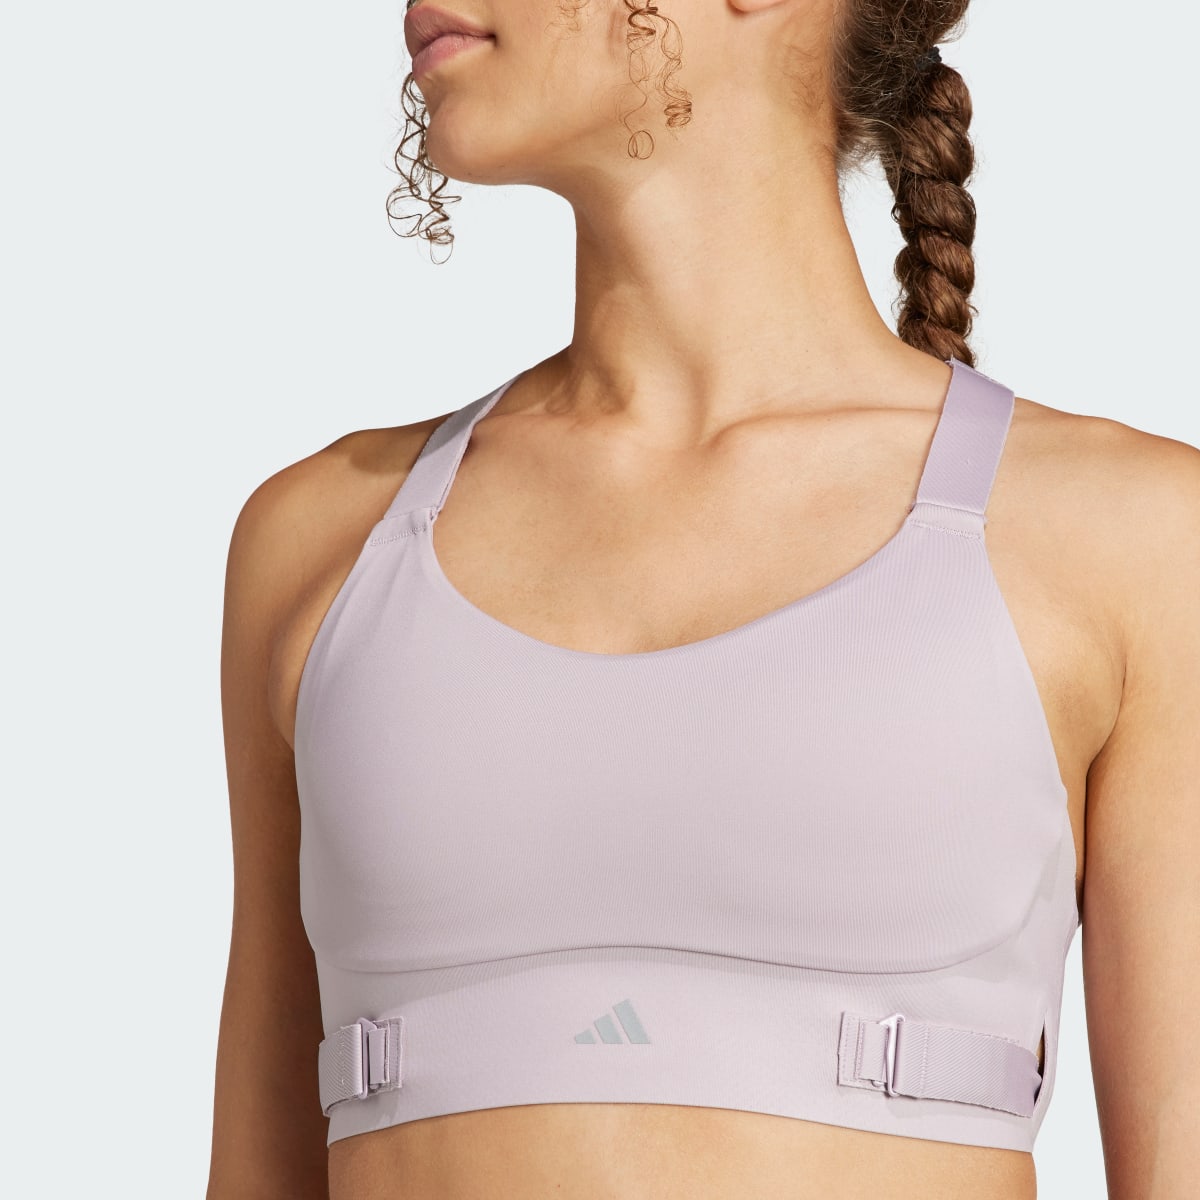 Adidas Brassière FastImpact Luxe Run Maintien fort. 7